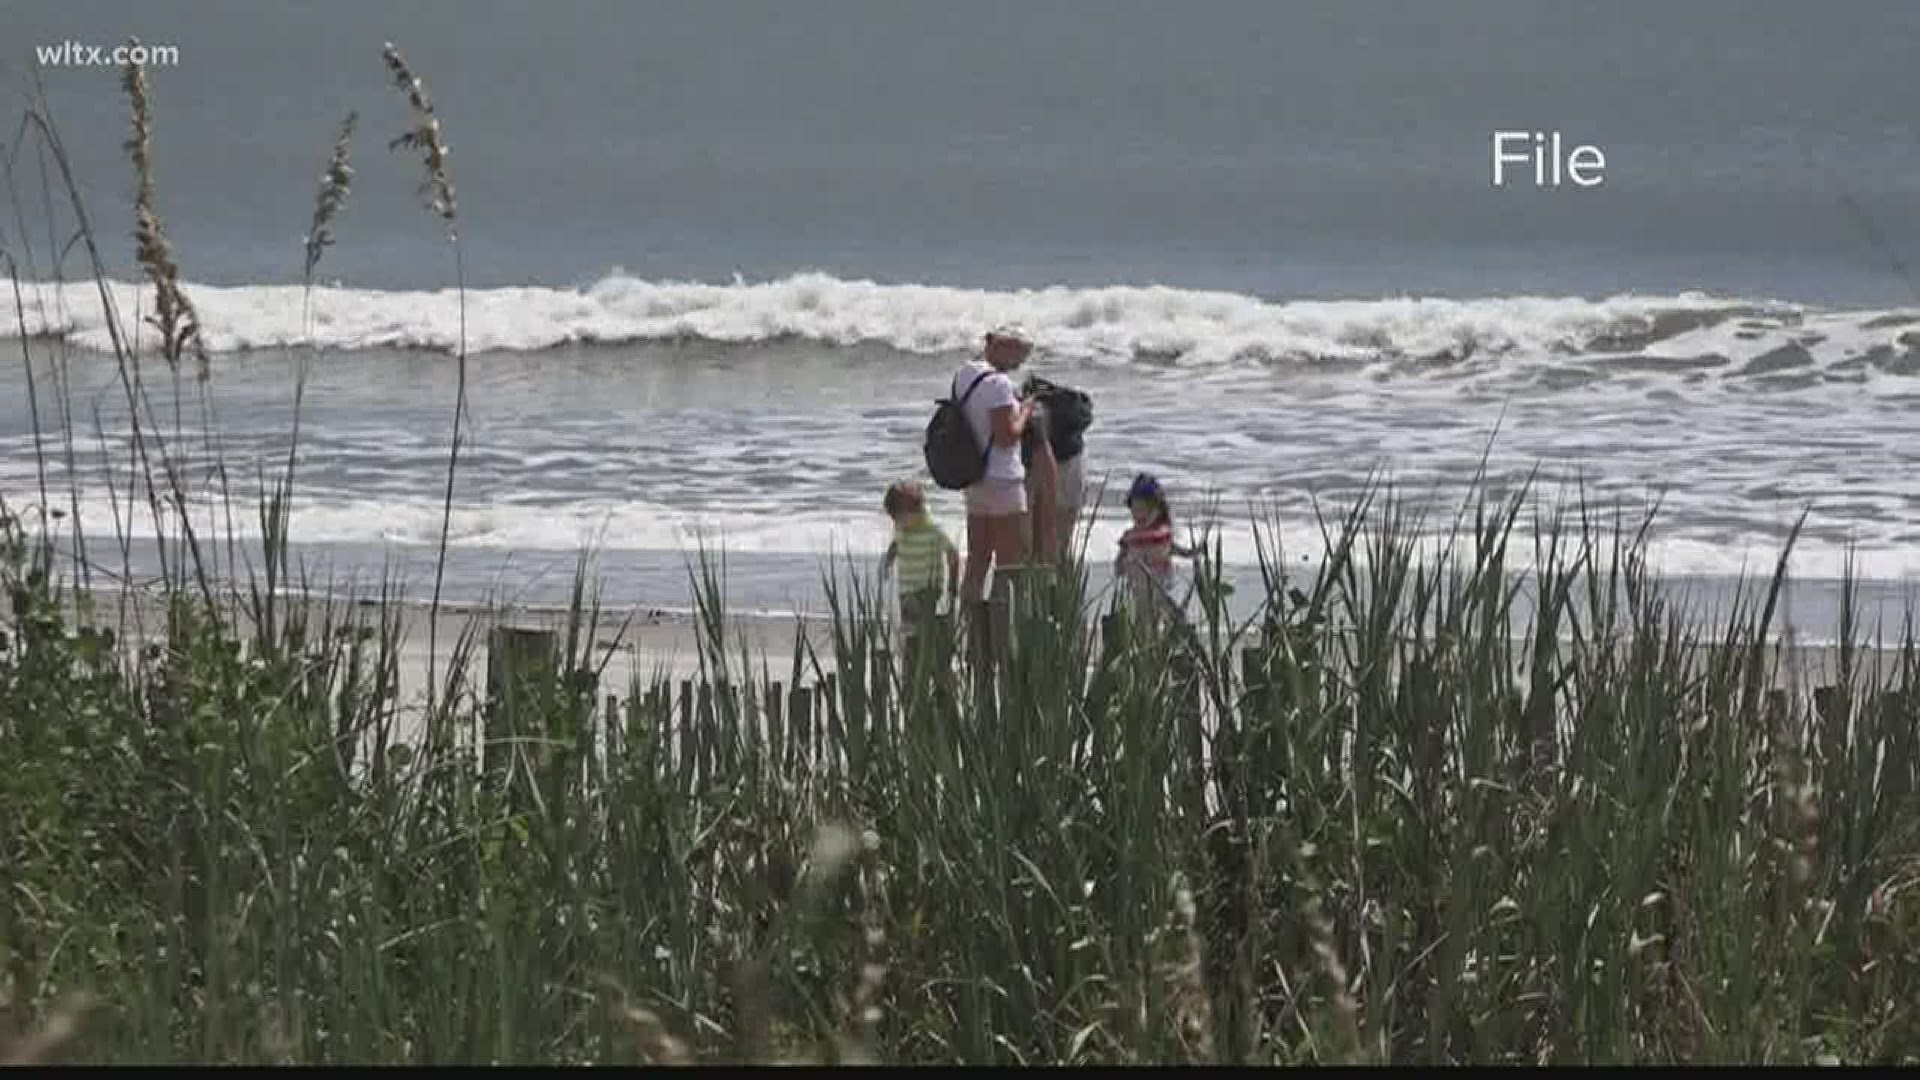 A South Carolina state representative is asking Gov. Henry McMaster to reopen the state's beaches.